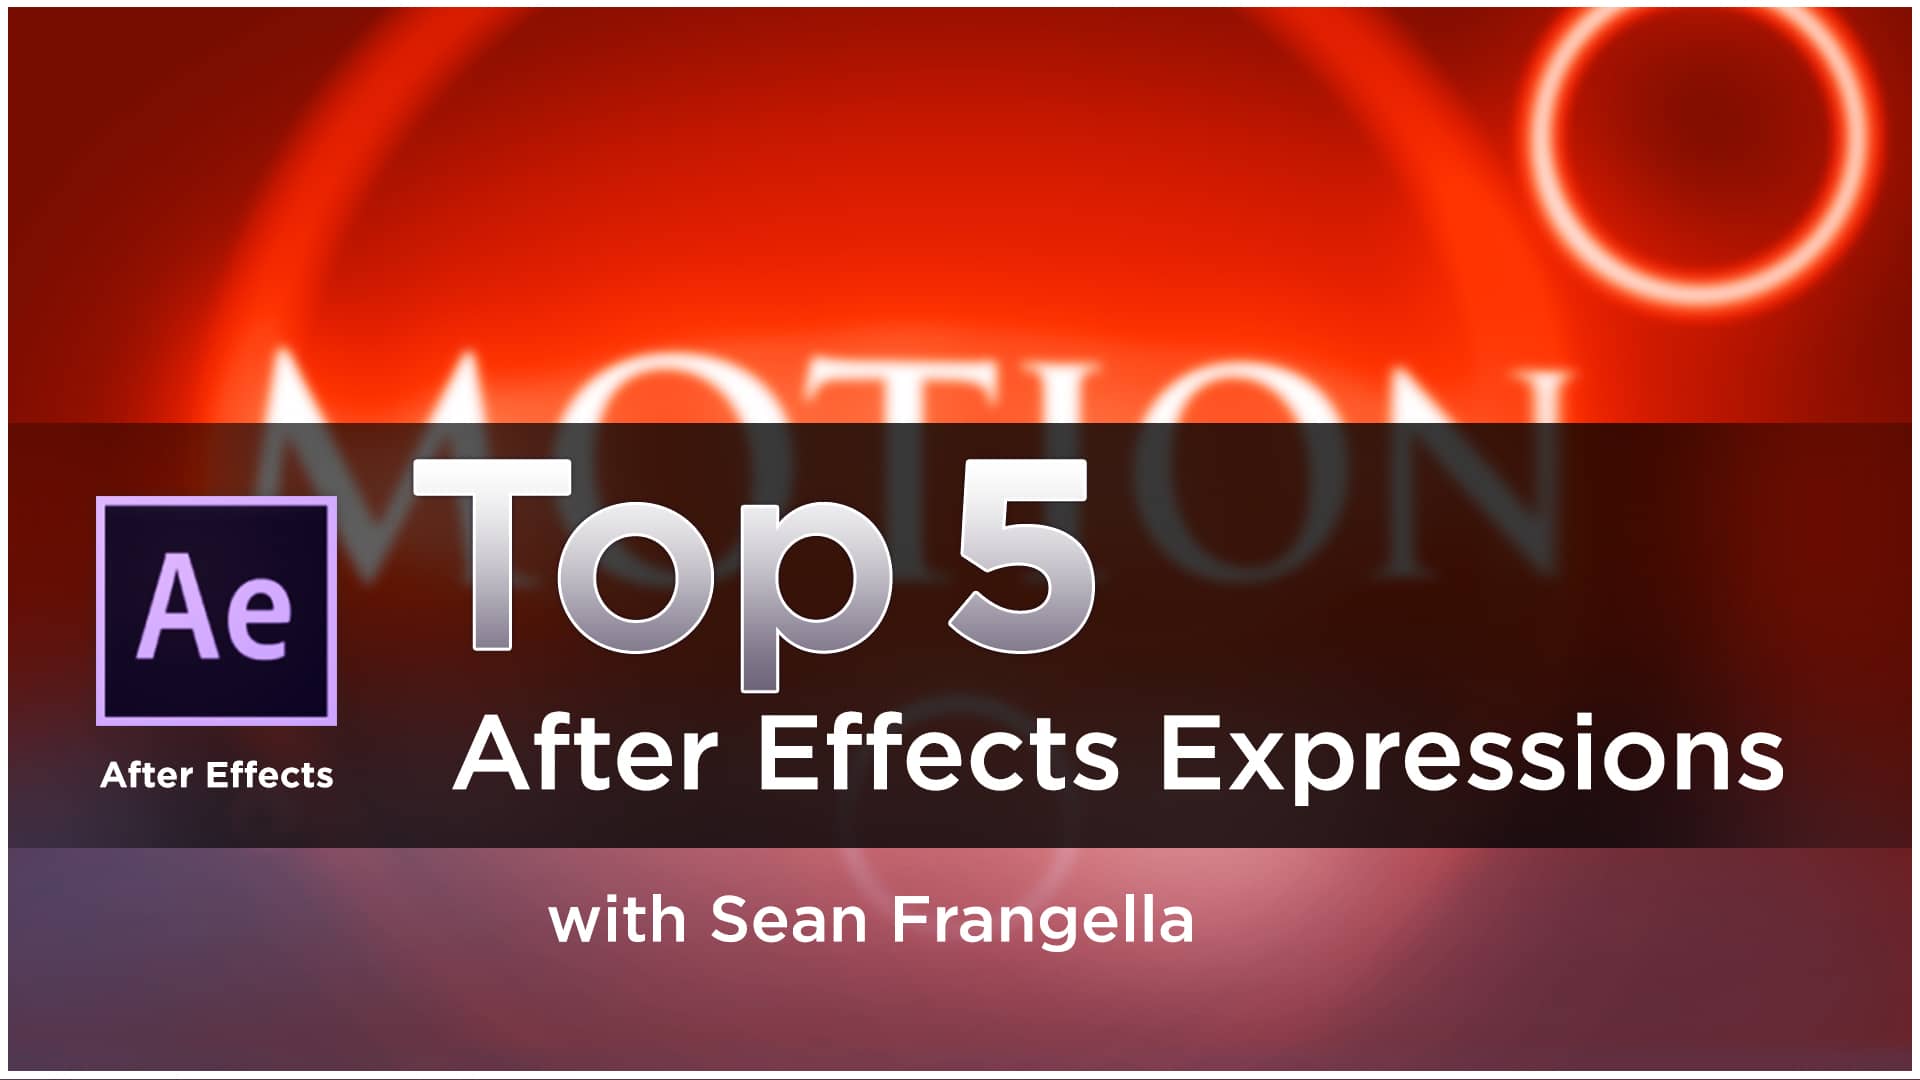 after effects expressions marcus geduld pdf download